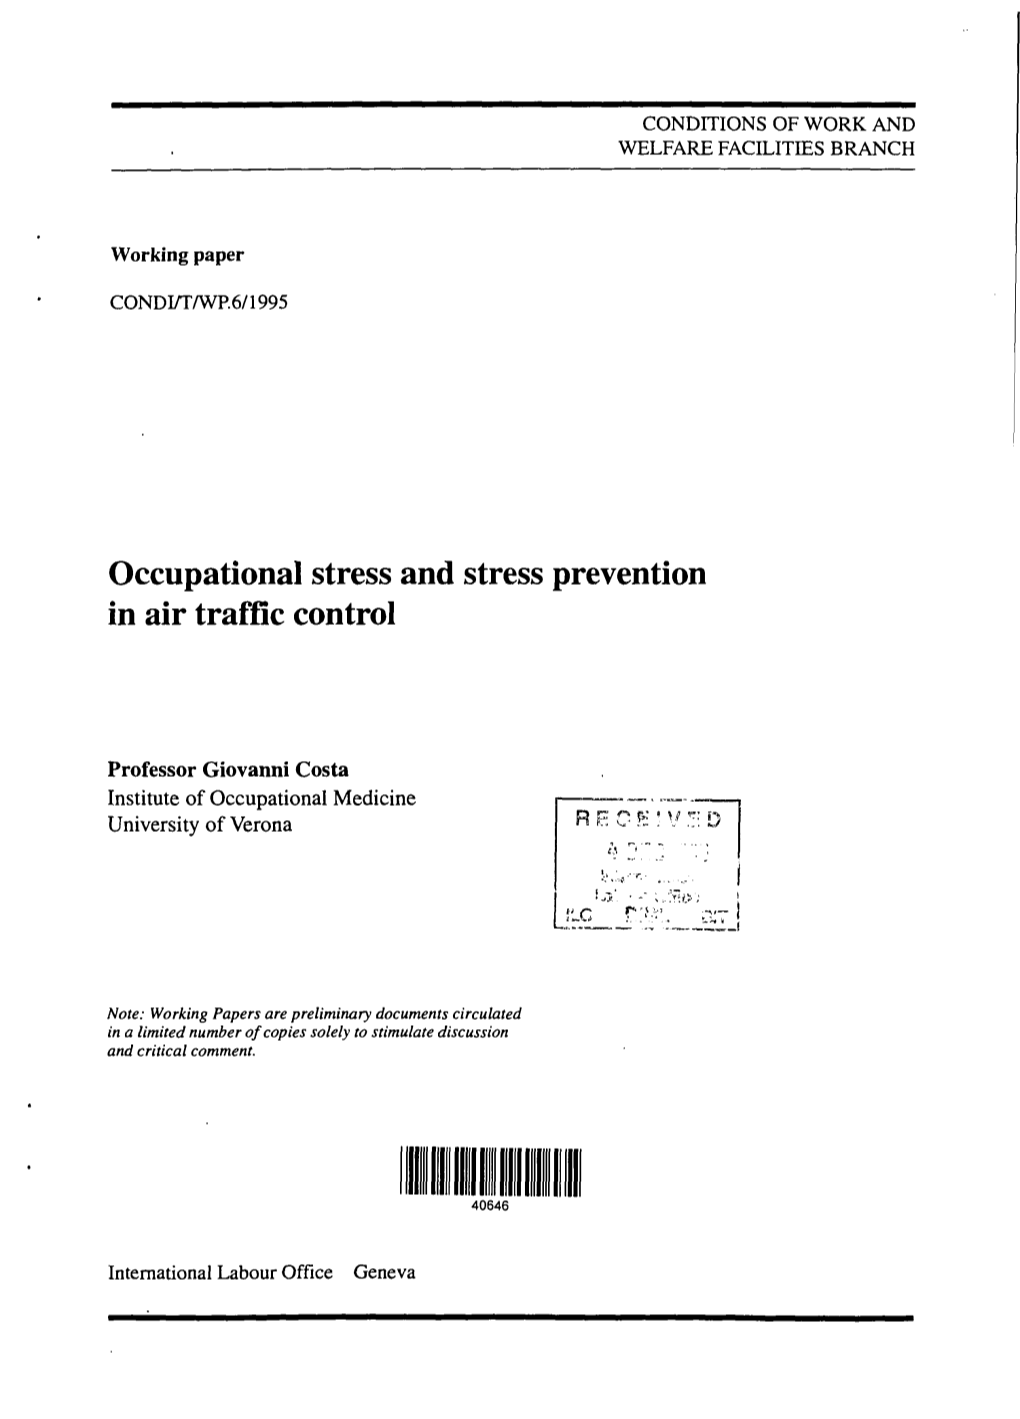 Occupational Stress and Stress Prevention in Air Traffic Control